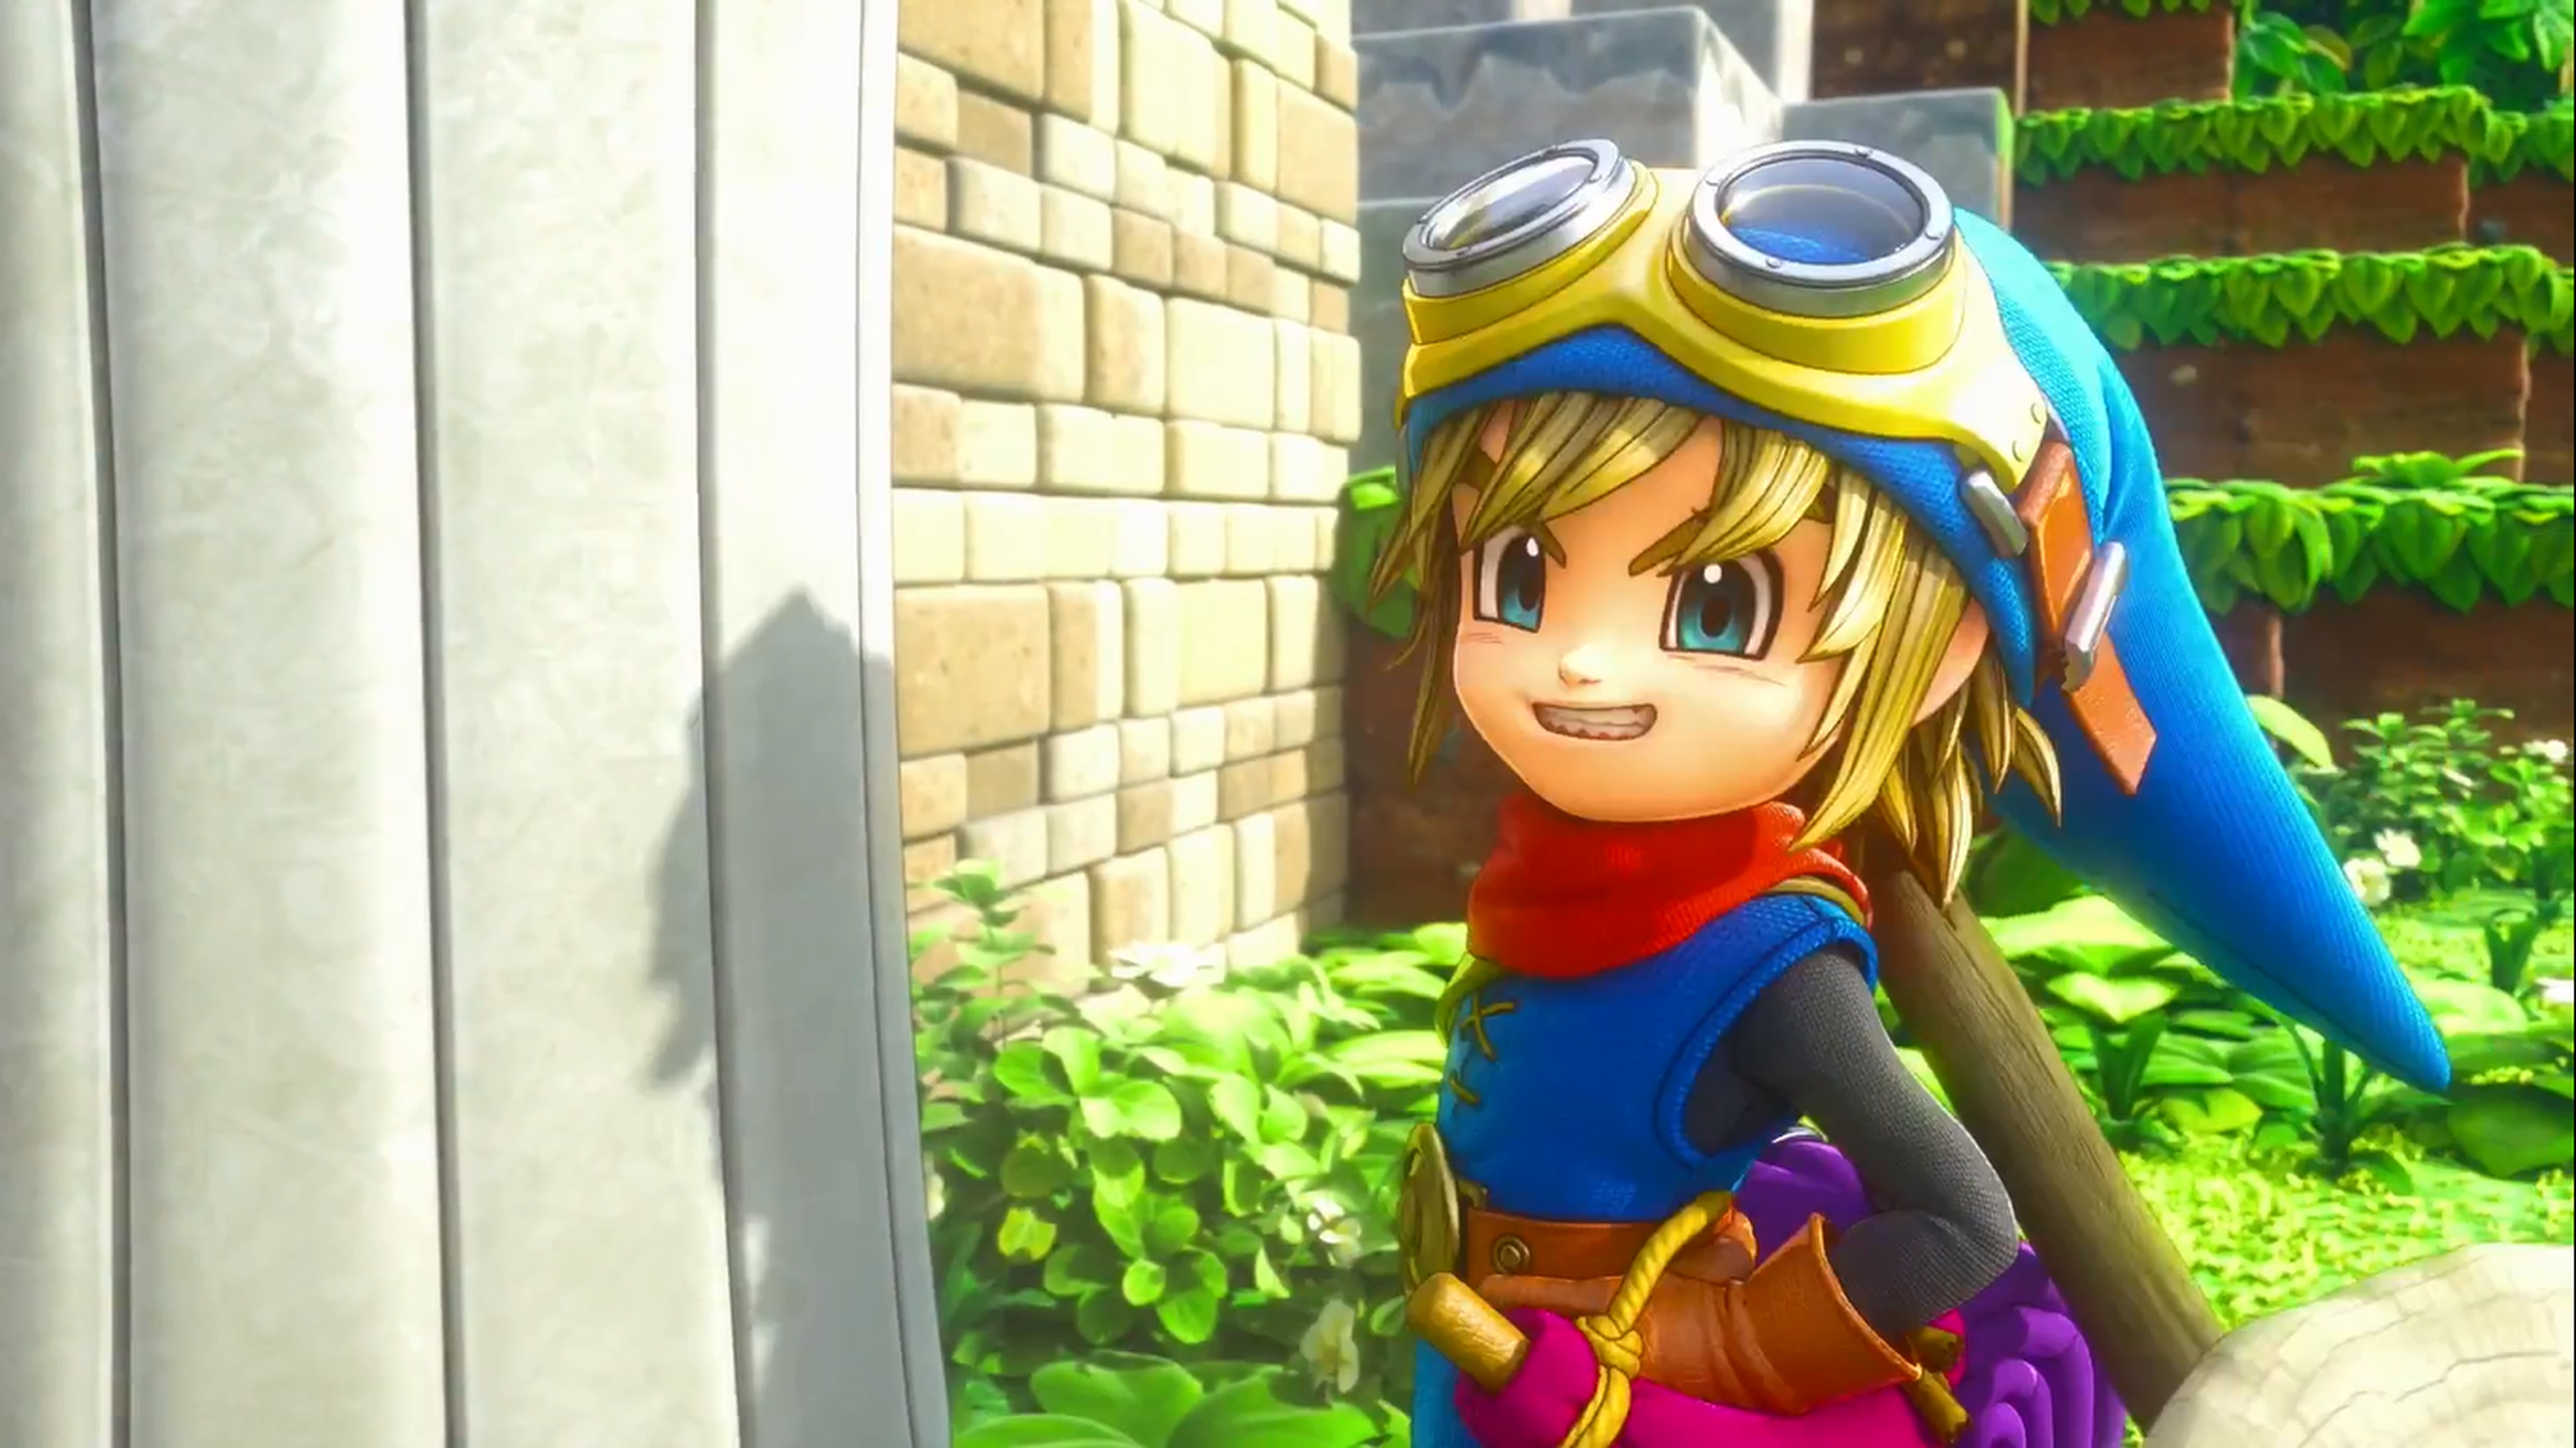 Dragon Quest Builders Launch Trailer - Build to Save the World!